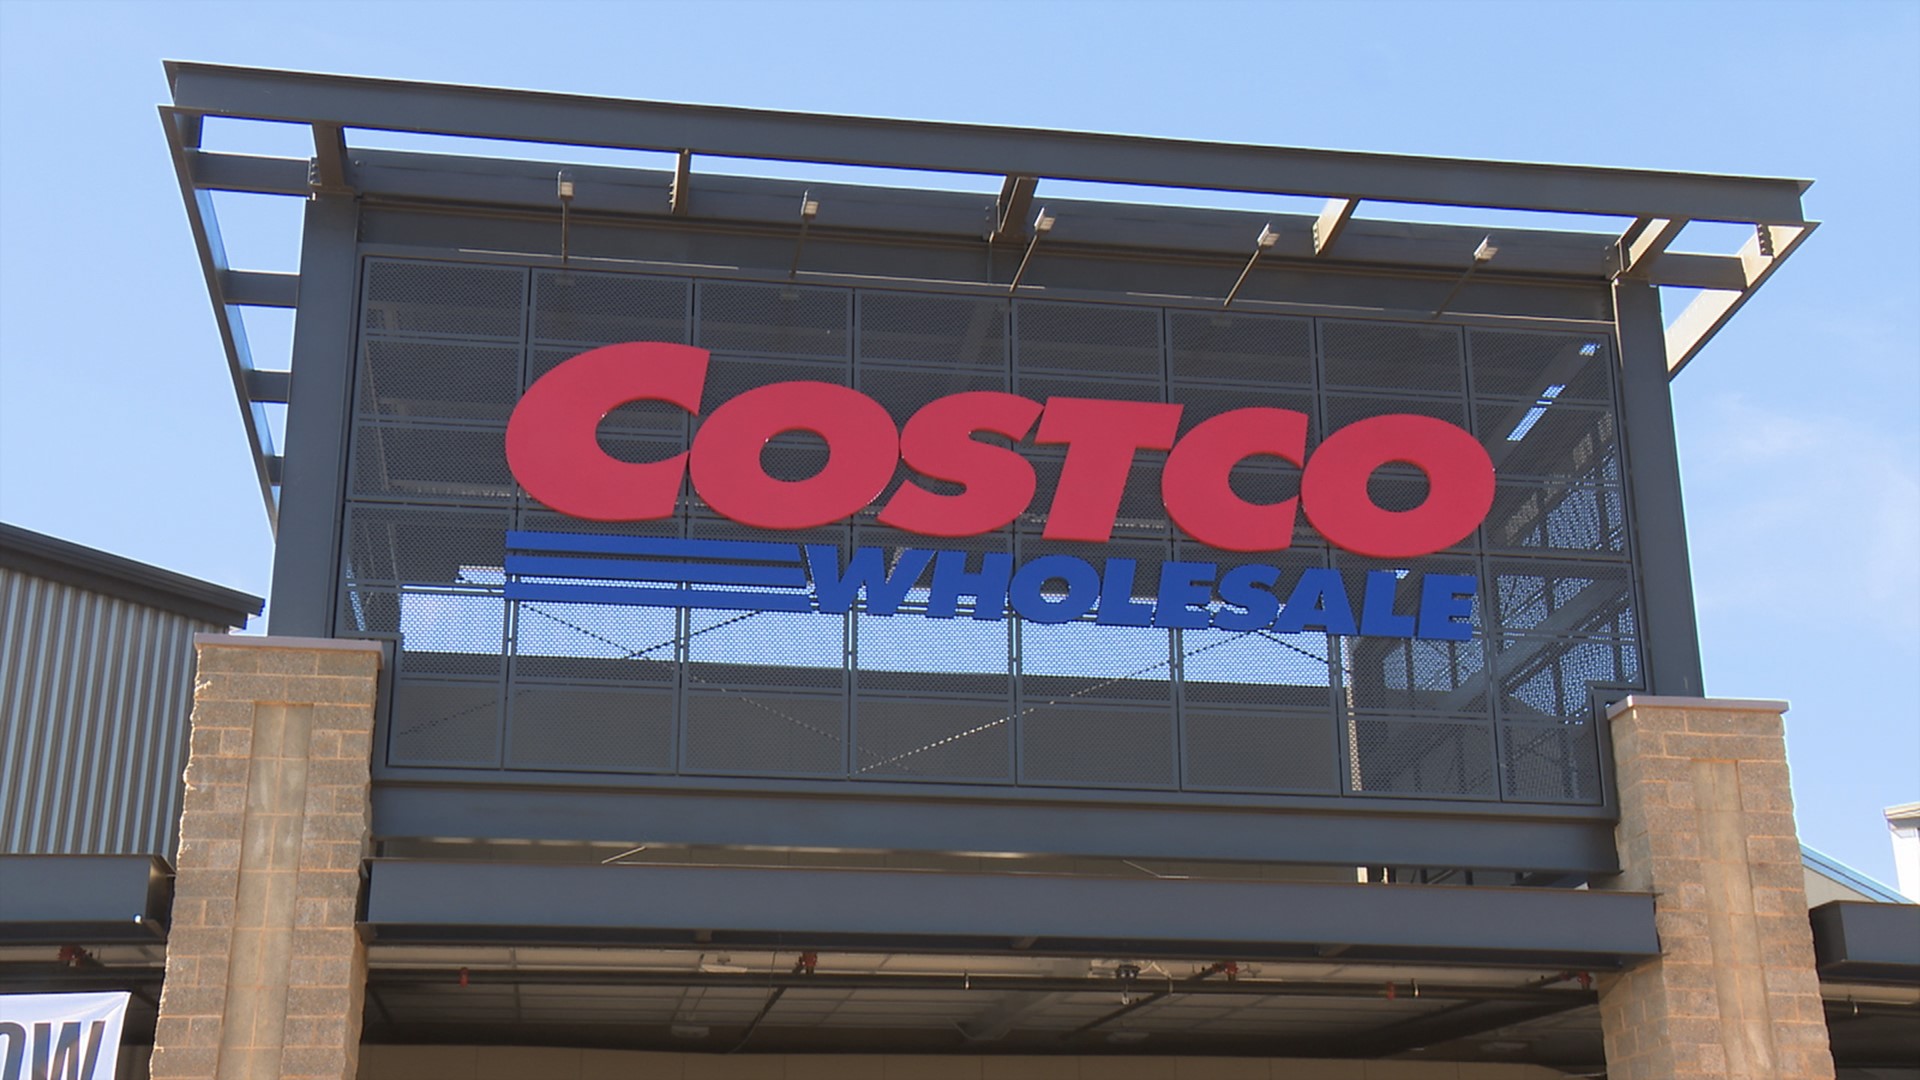 A new Costco store opened in Elk Grove on Thursday, Sept. 27. The new location includes a 150,000  square-foot warehouse and a gas station with space for 24 cars to fill up. The store is part of a wave of development planned along Elk Grove Blvd.